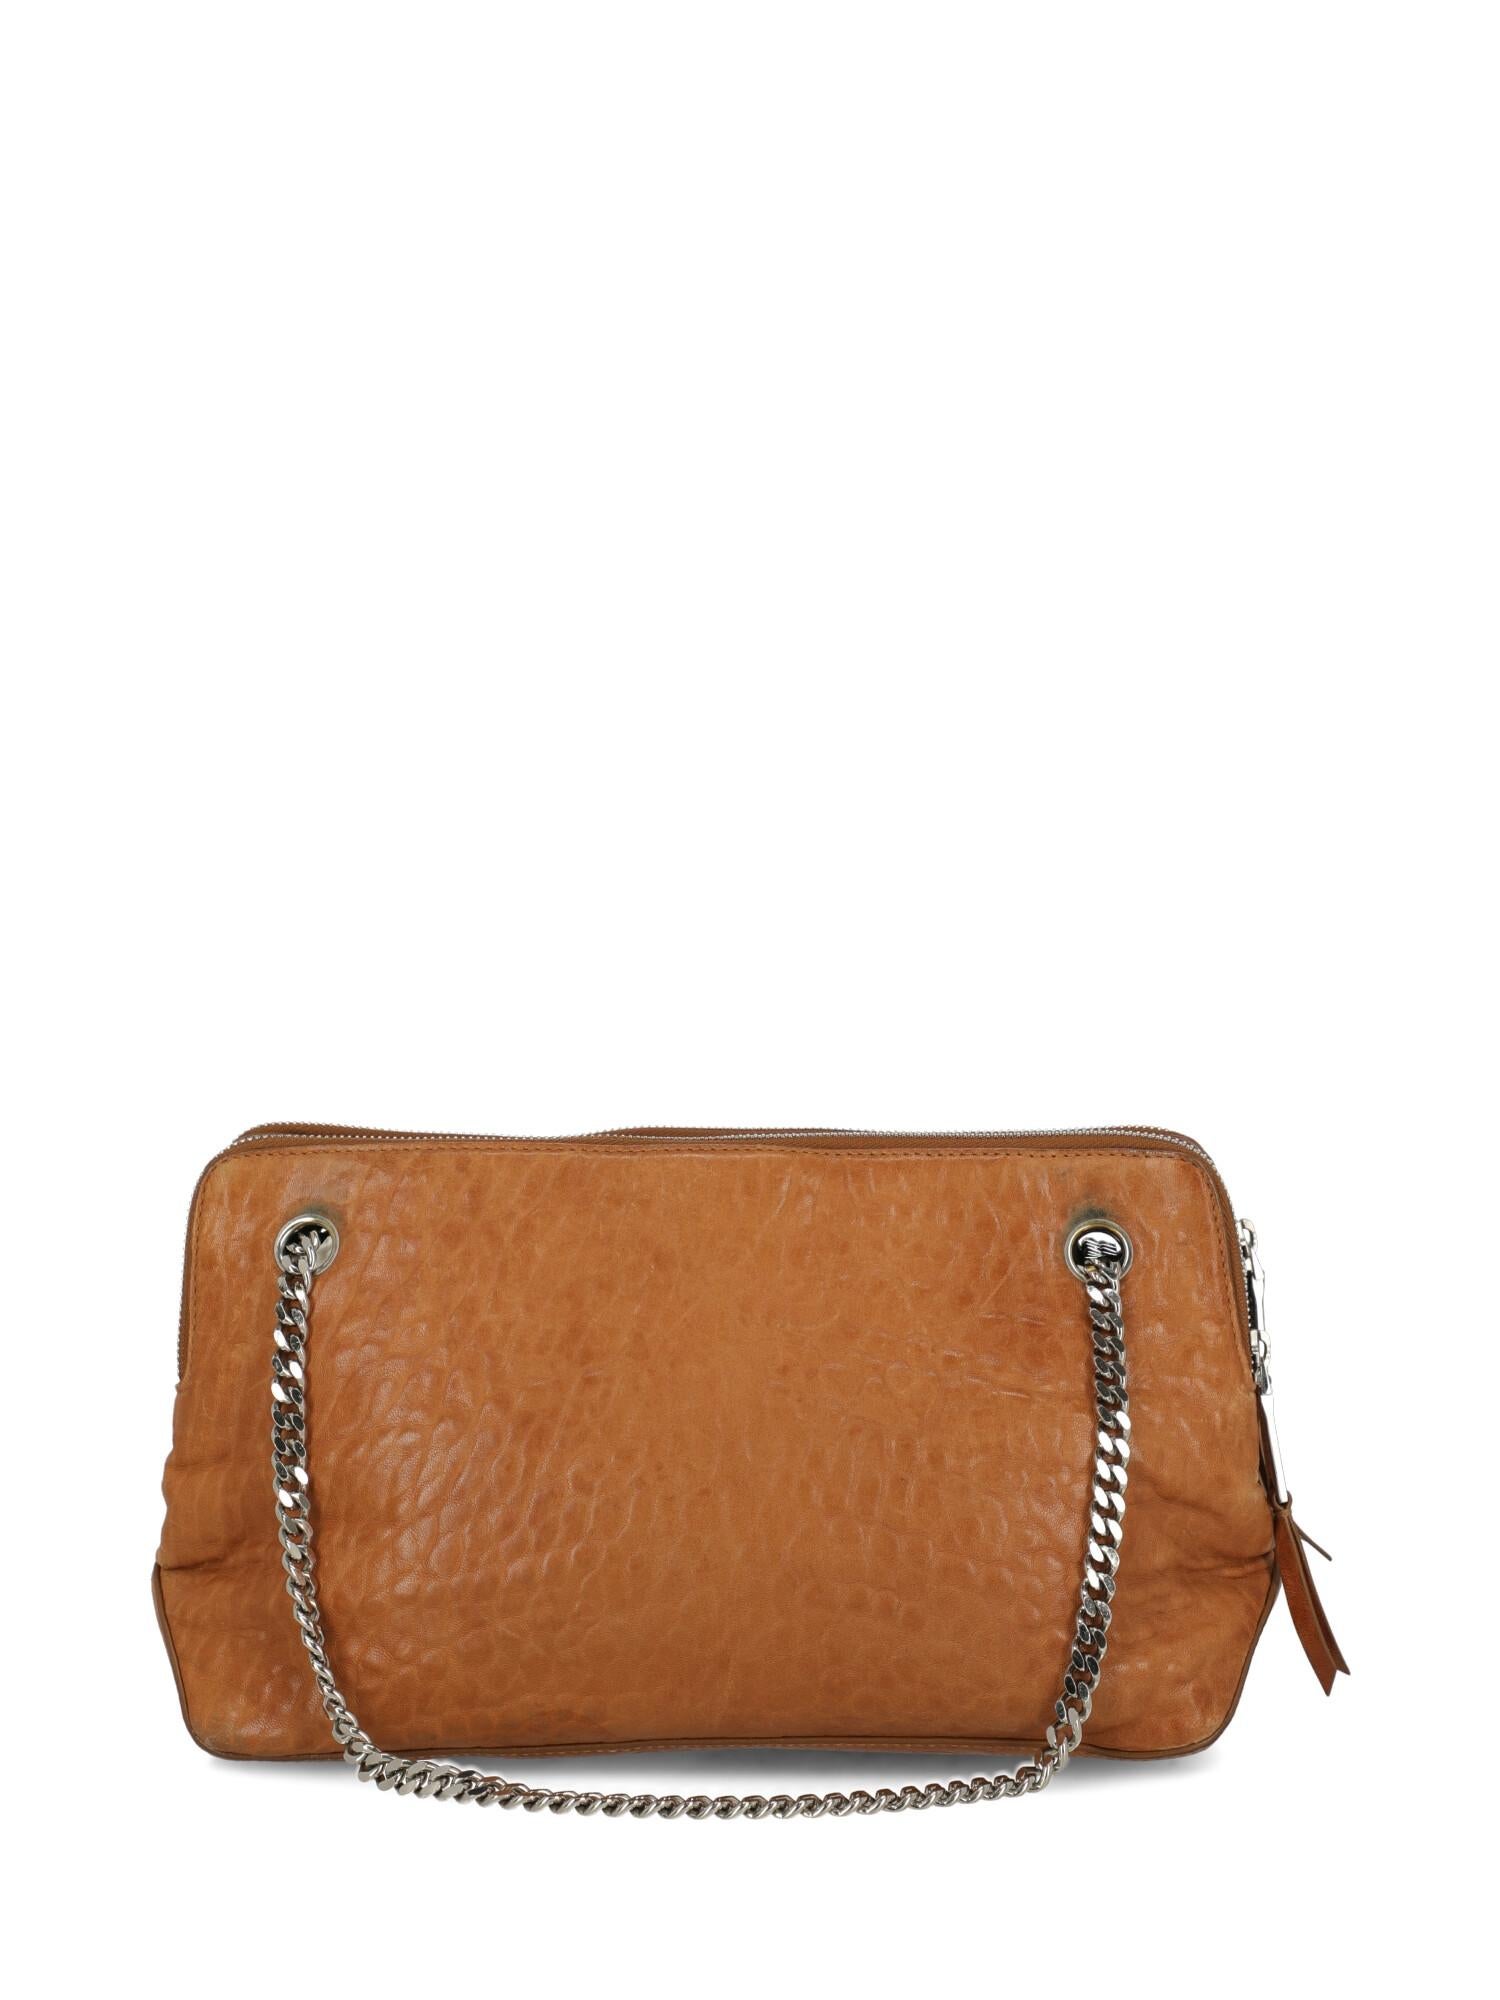 Rochas Woman Shoulder bag Camel Color Leather In Fair Condition For Sale In Milan, IT